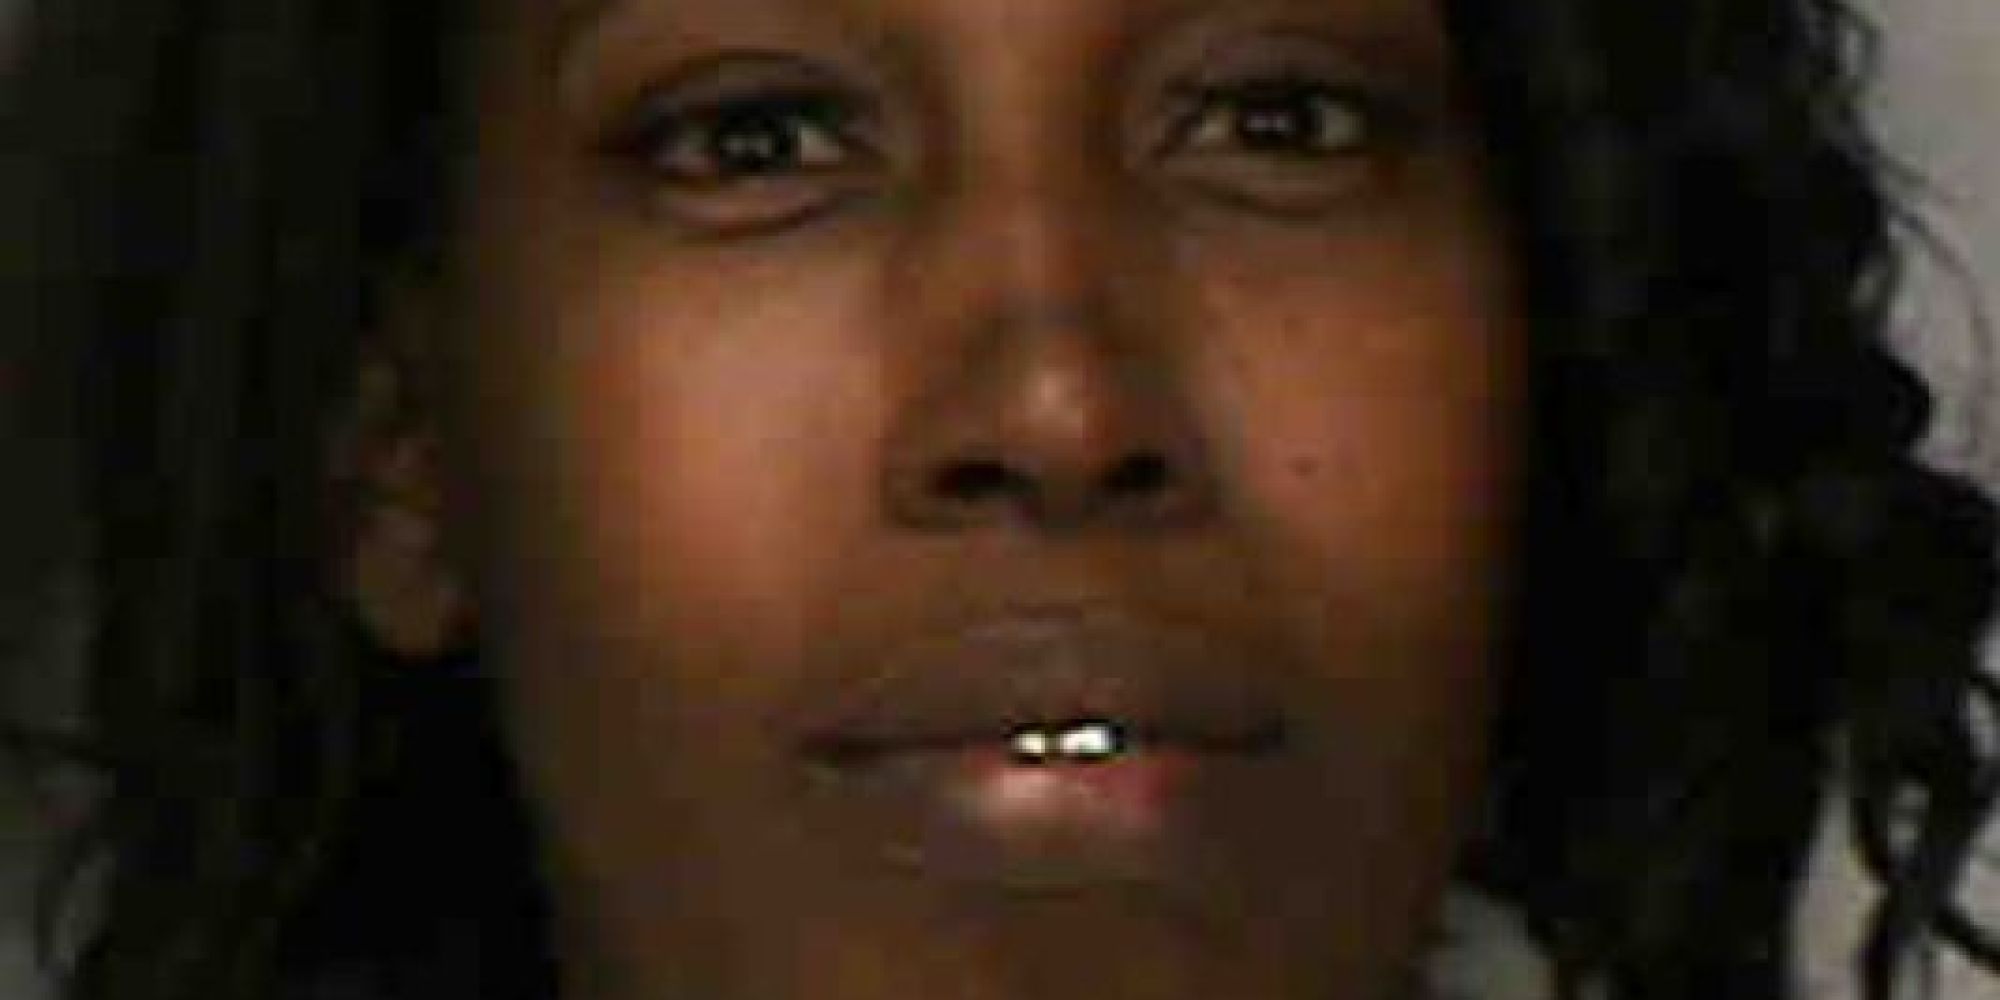 Female Inmate Latandra Ellington Expressed Fear Of Guards Prior To